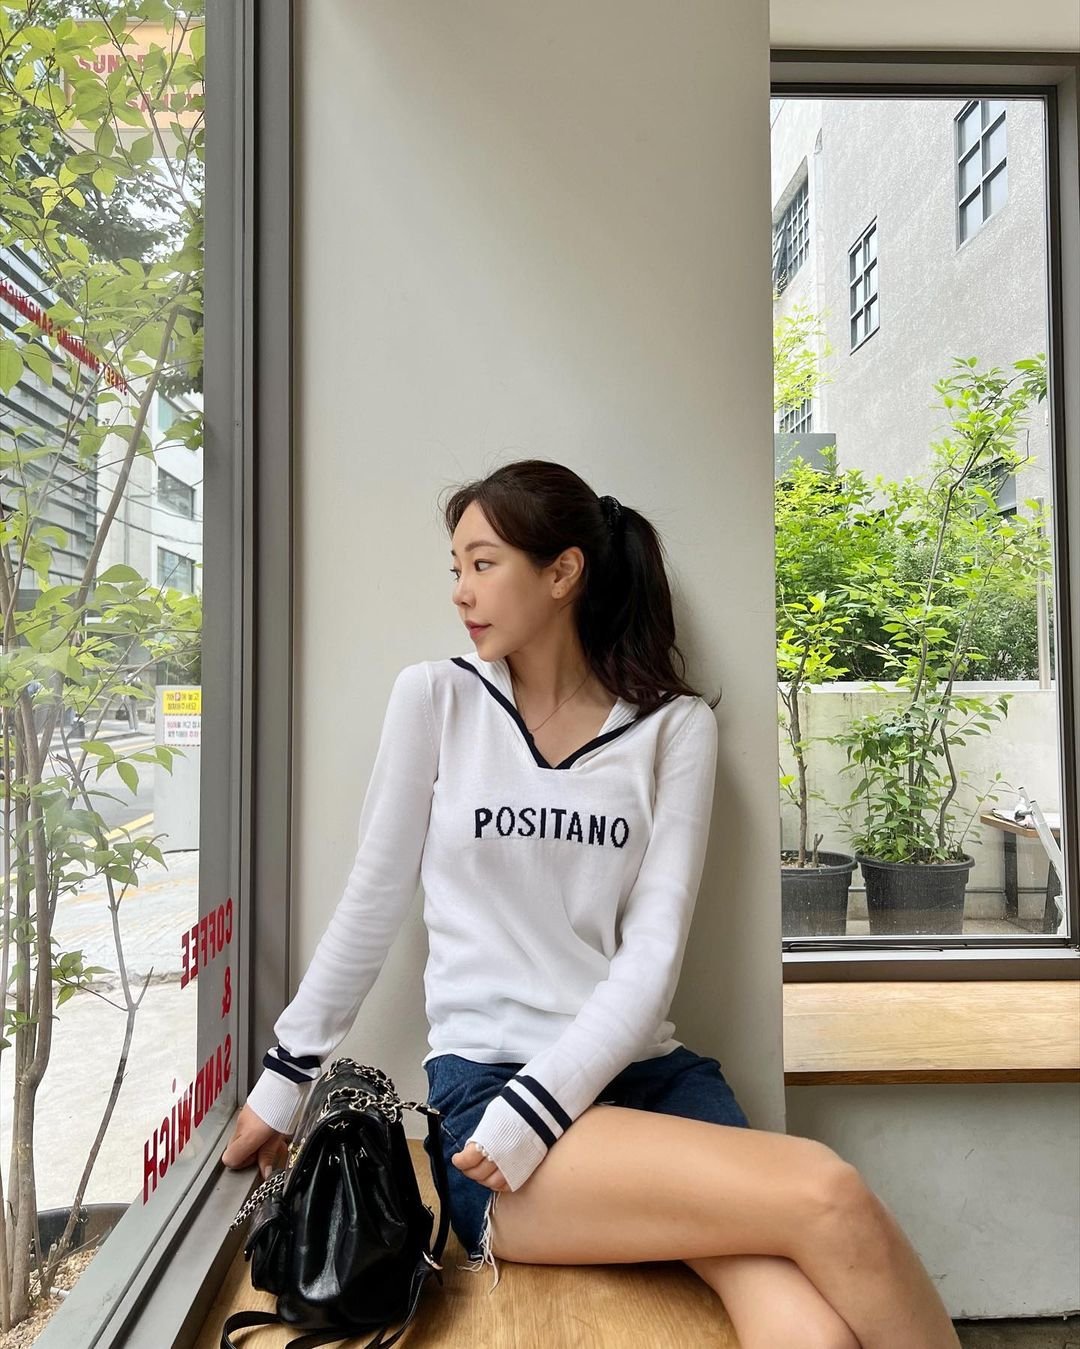 My name is Belle. I am 32 years old. Nice to meet you. I am from Taiwan and now I am in Seoul.    https://t.co/ySqtlRa877